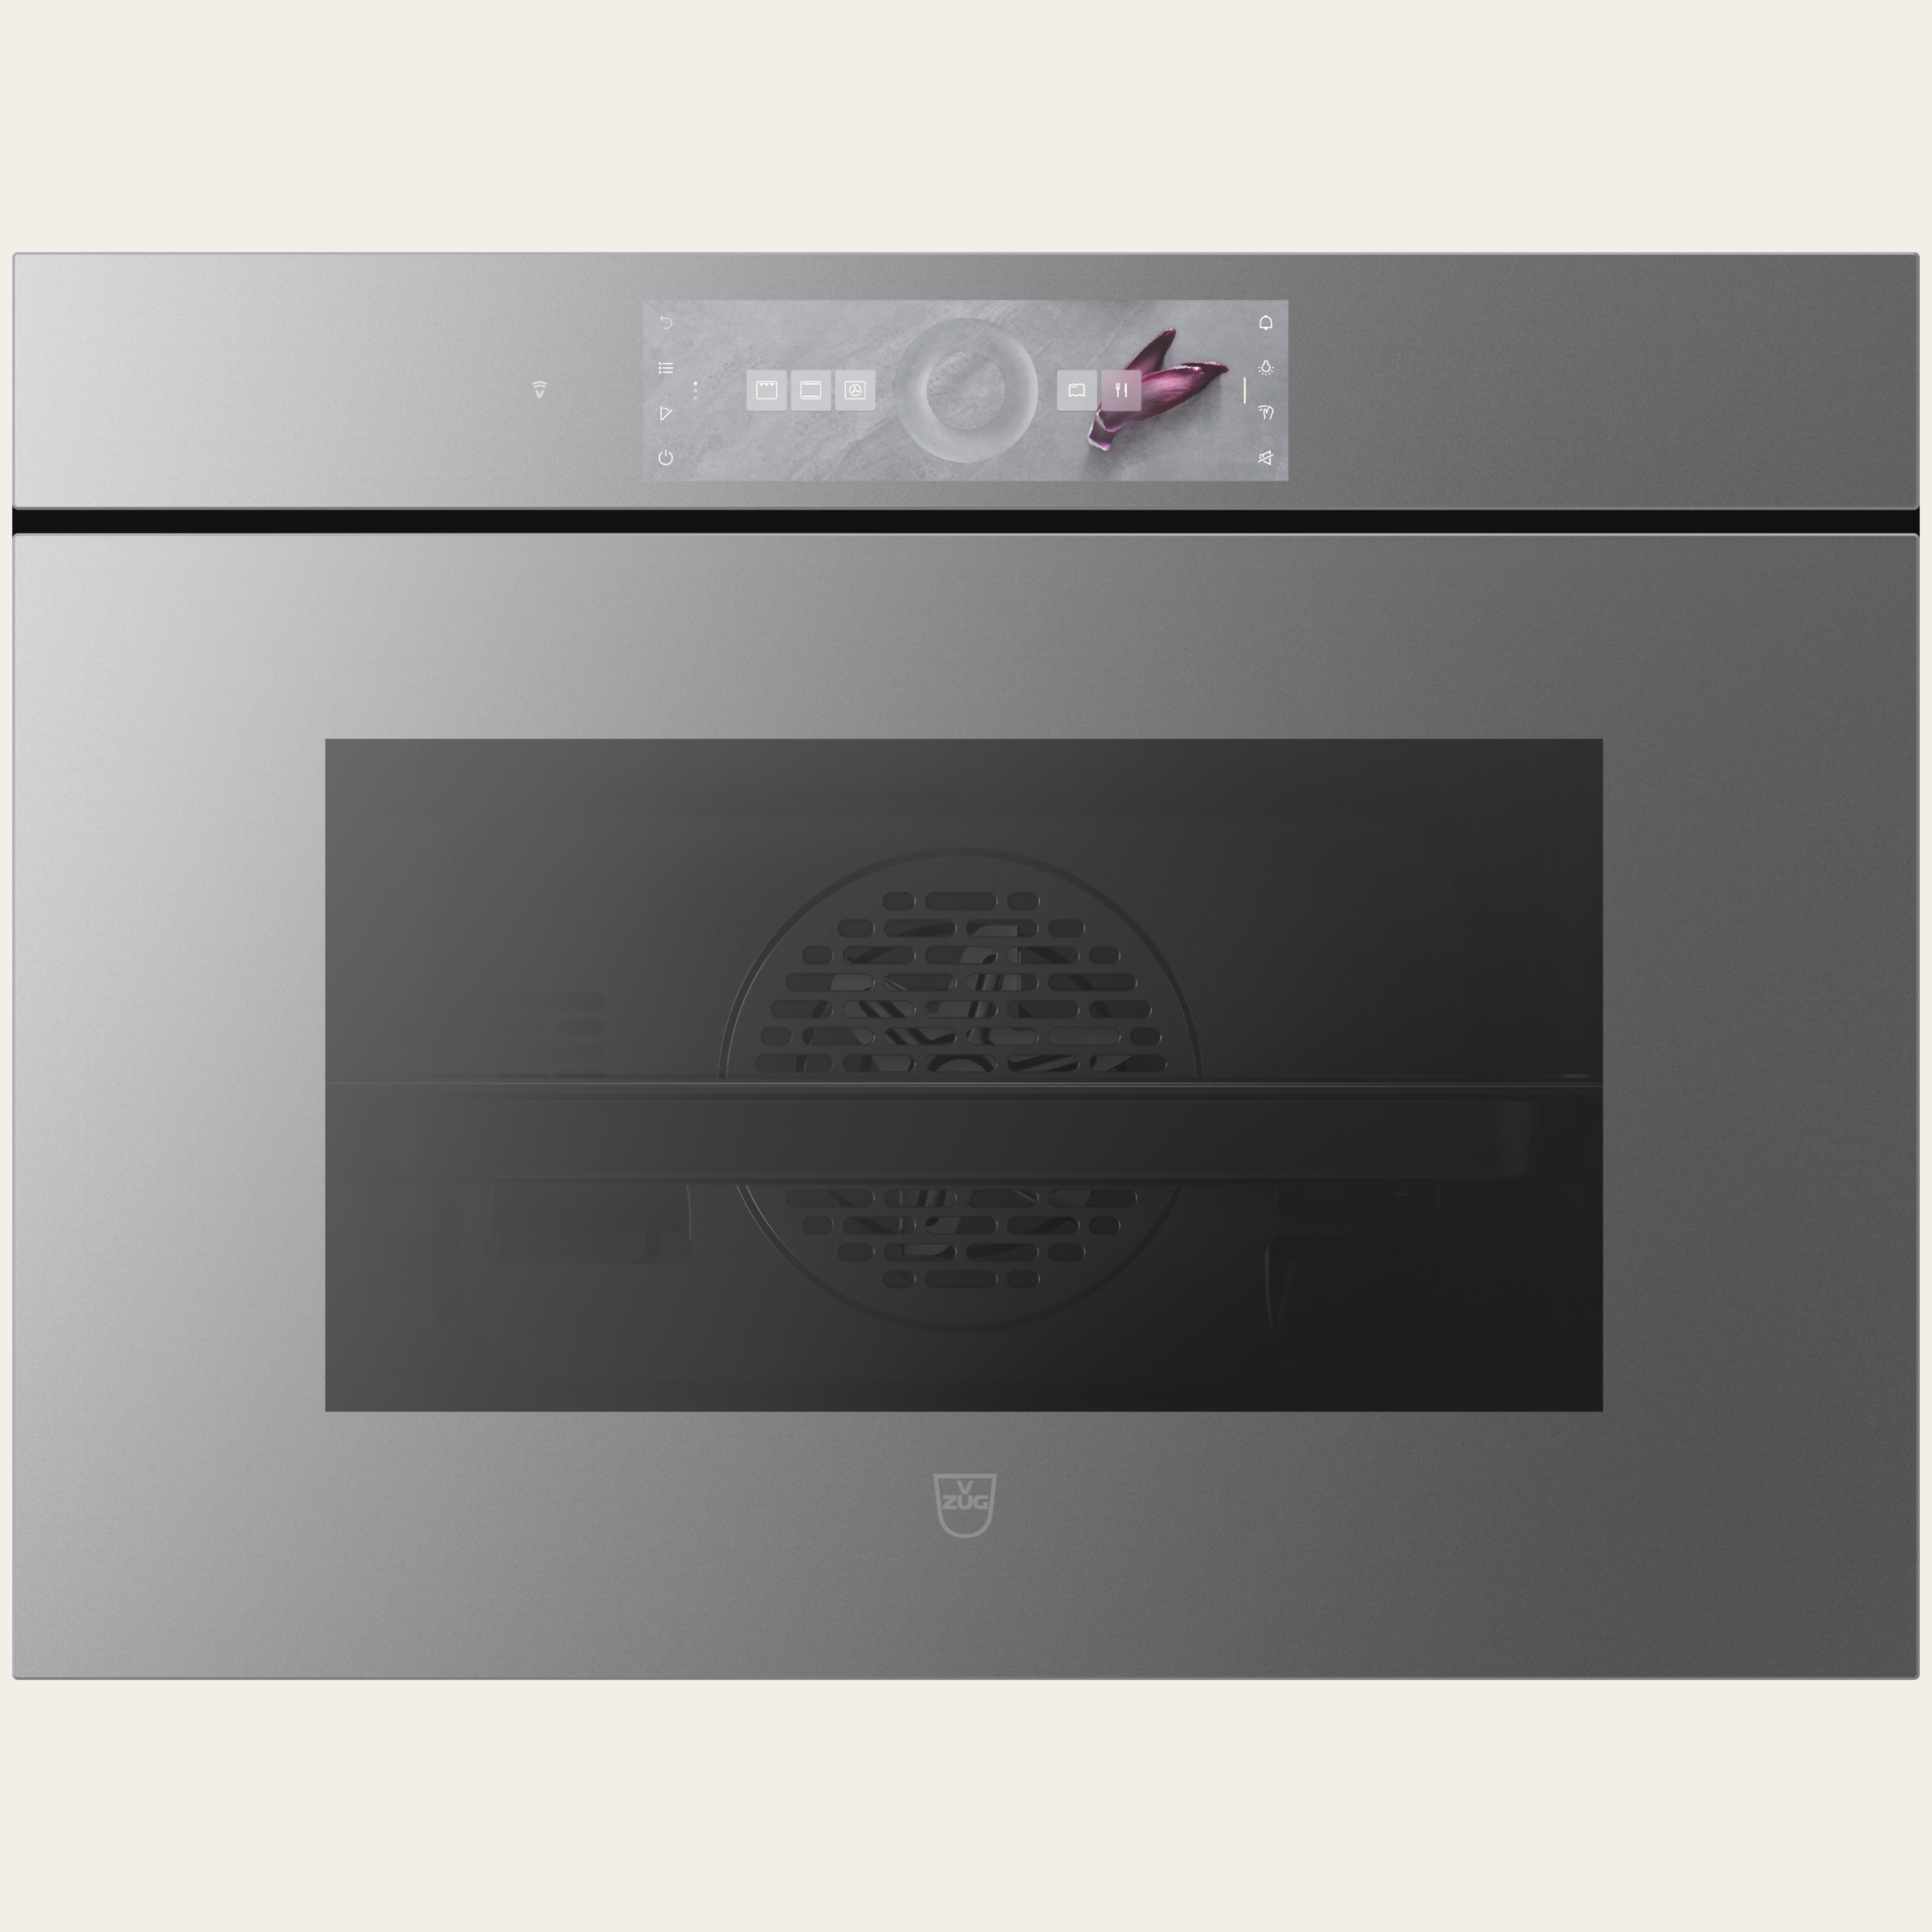 V-ZUG Oven Combair V6000 45P, Standard width: 60 cm,Standard height: 45 cm, Platinum mirror glass, Handle: Handle-free, Touchscreen with CircleSlider, V-ZUG-Home, Pyrolytic self-cleaning